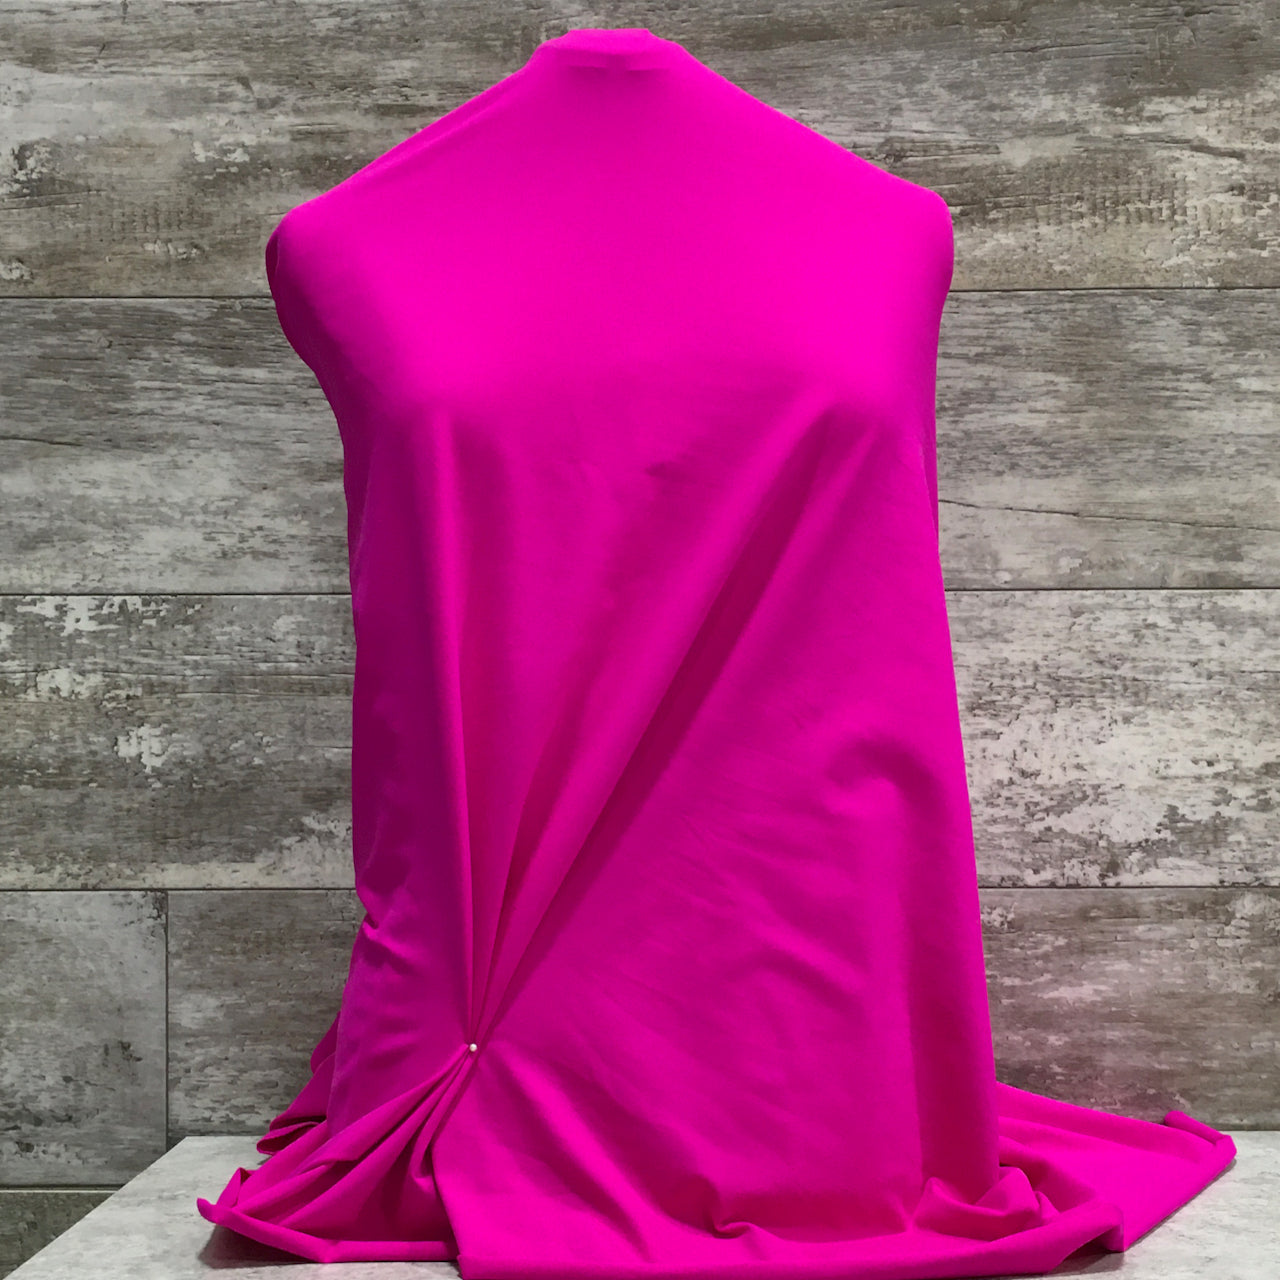 Swimwear / Hot Pink Solid - Sold by the half yard